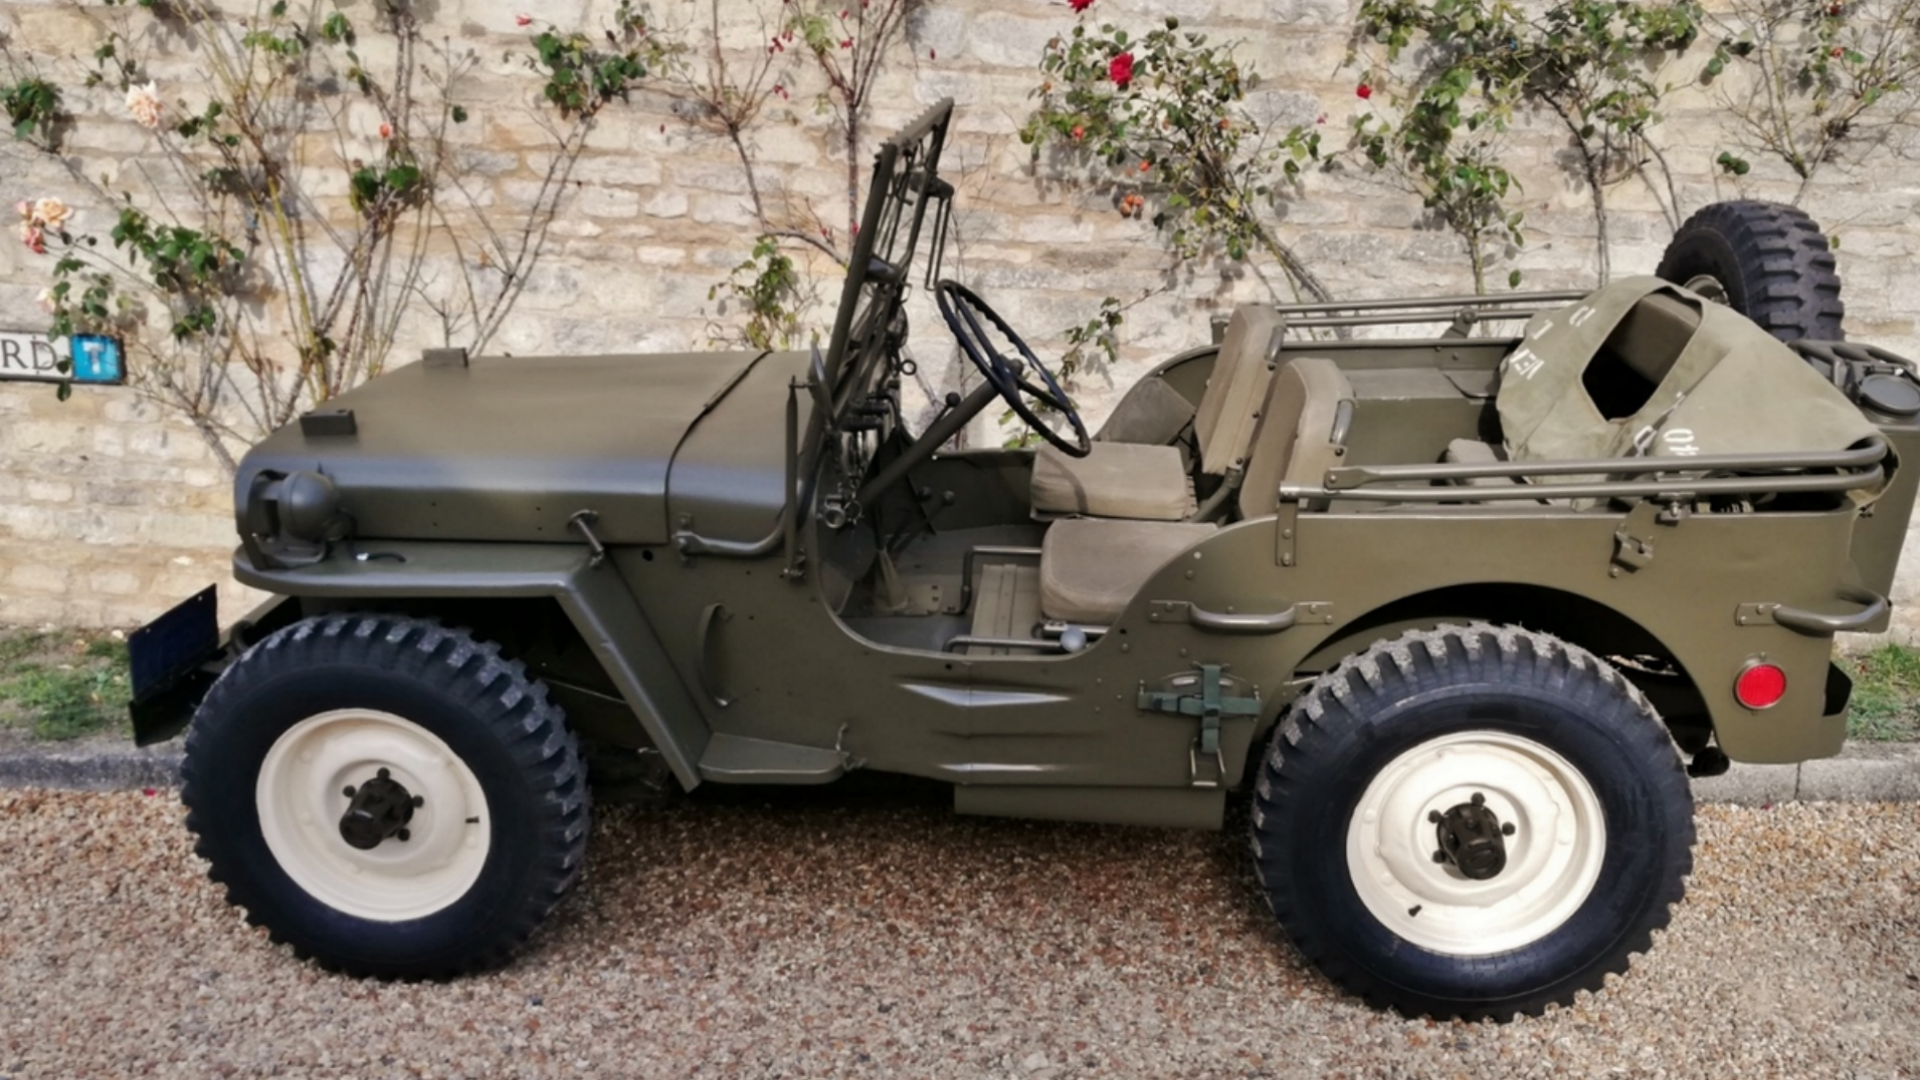 Steve McQueen Would Want You to Buy His 1945 Willys Jeep at Auction